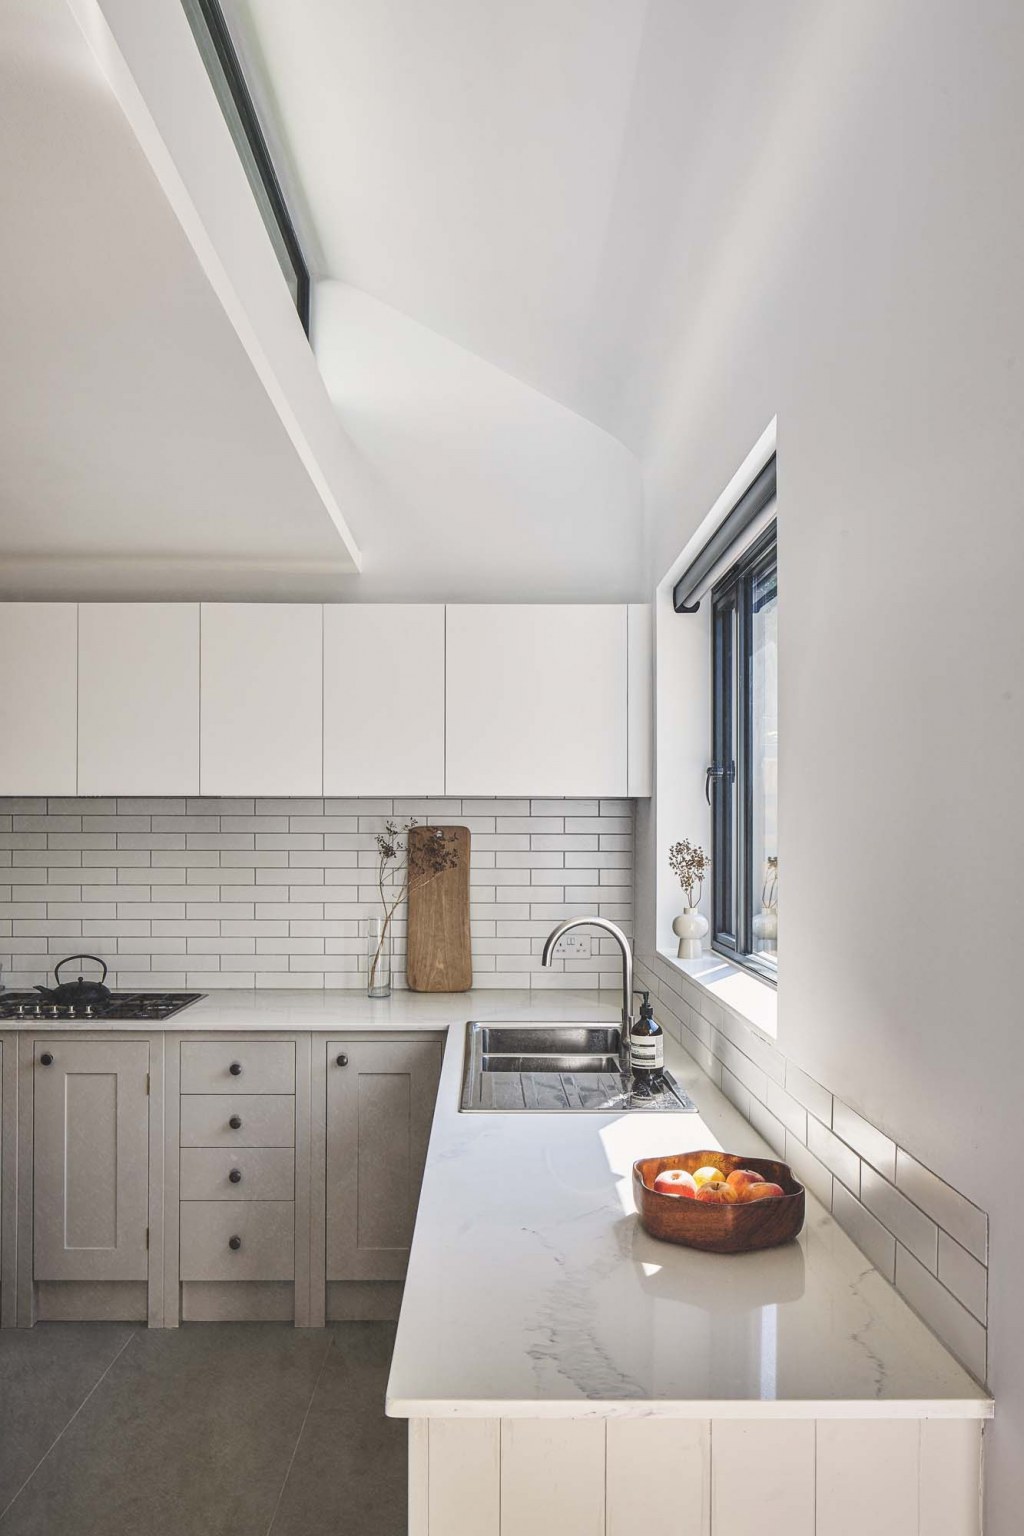 Rees Architects | Dollis Hill / Dollis Hill | The rooflight works with the direction of the sun's path.